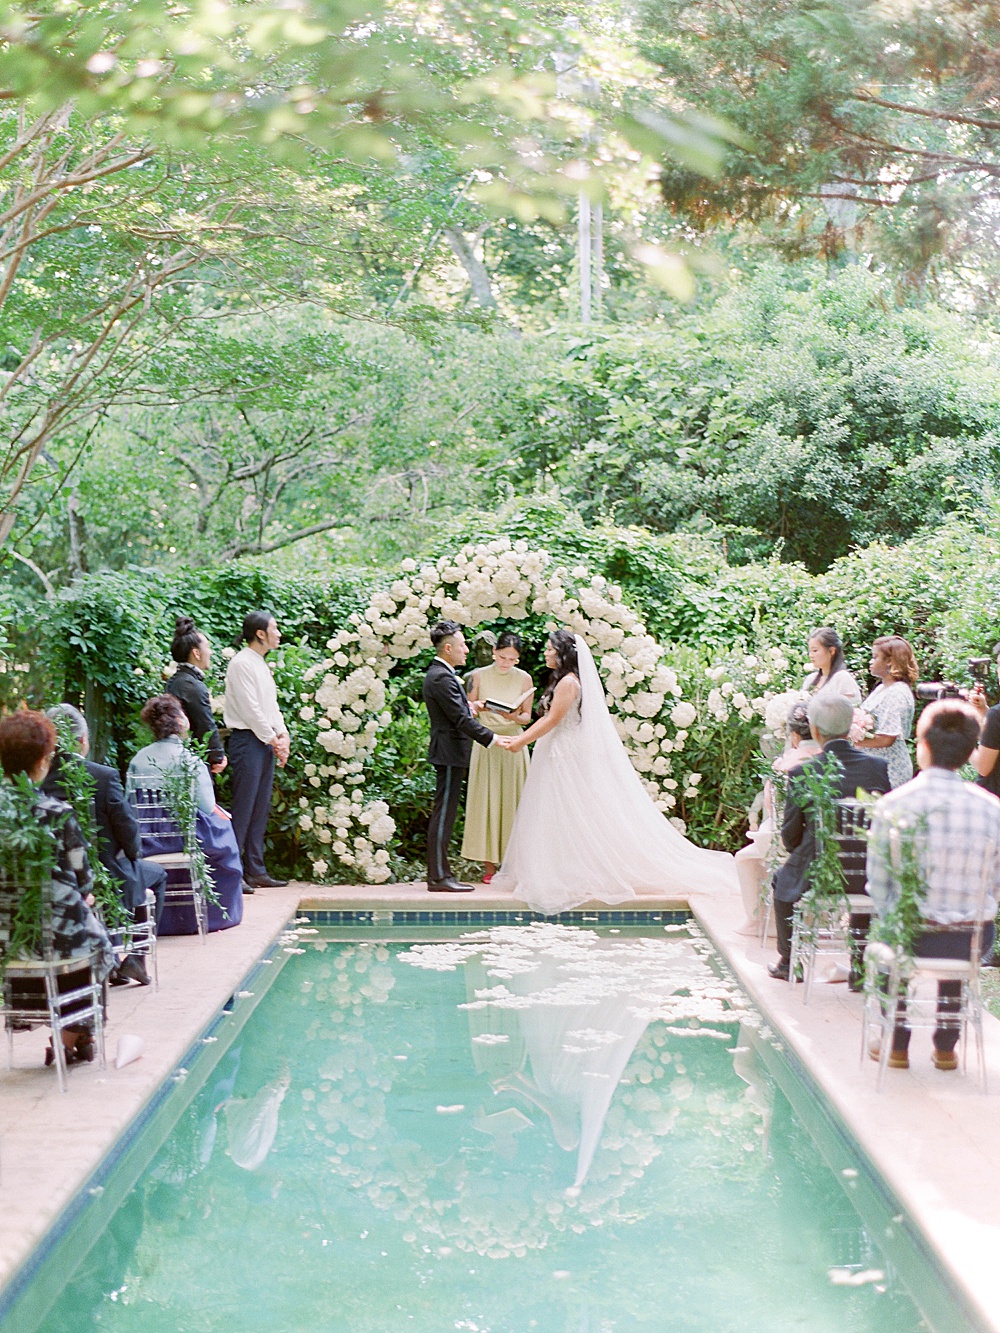 Wedding ceremony at a reflection pool at Meadowlark 1939 with a white floral arch